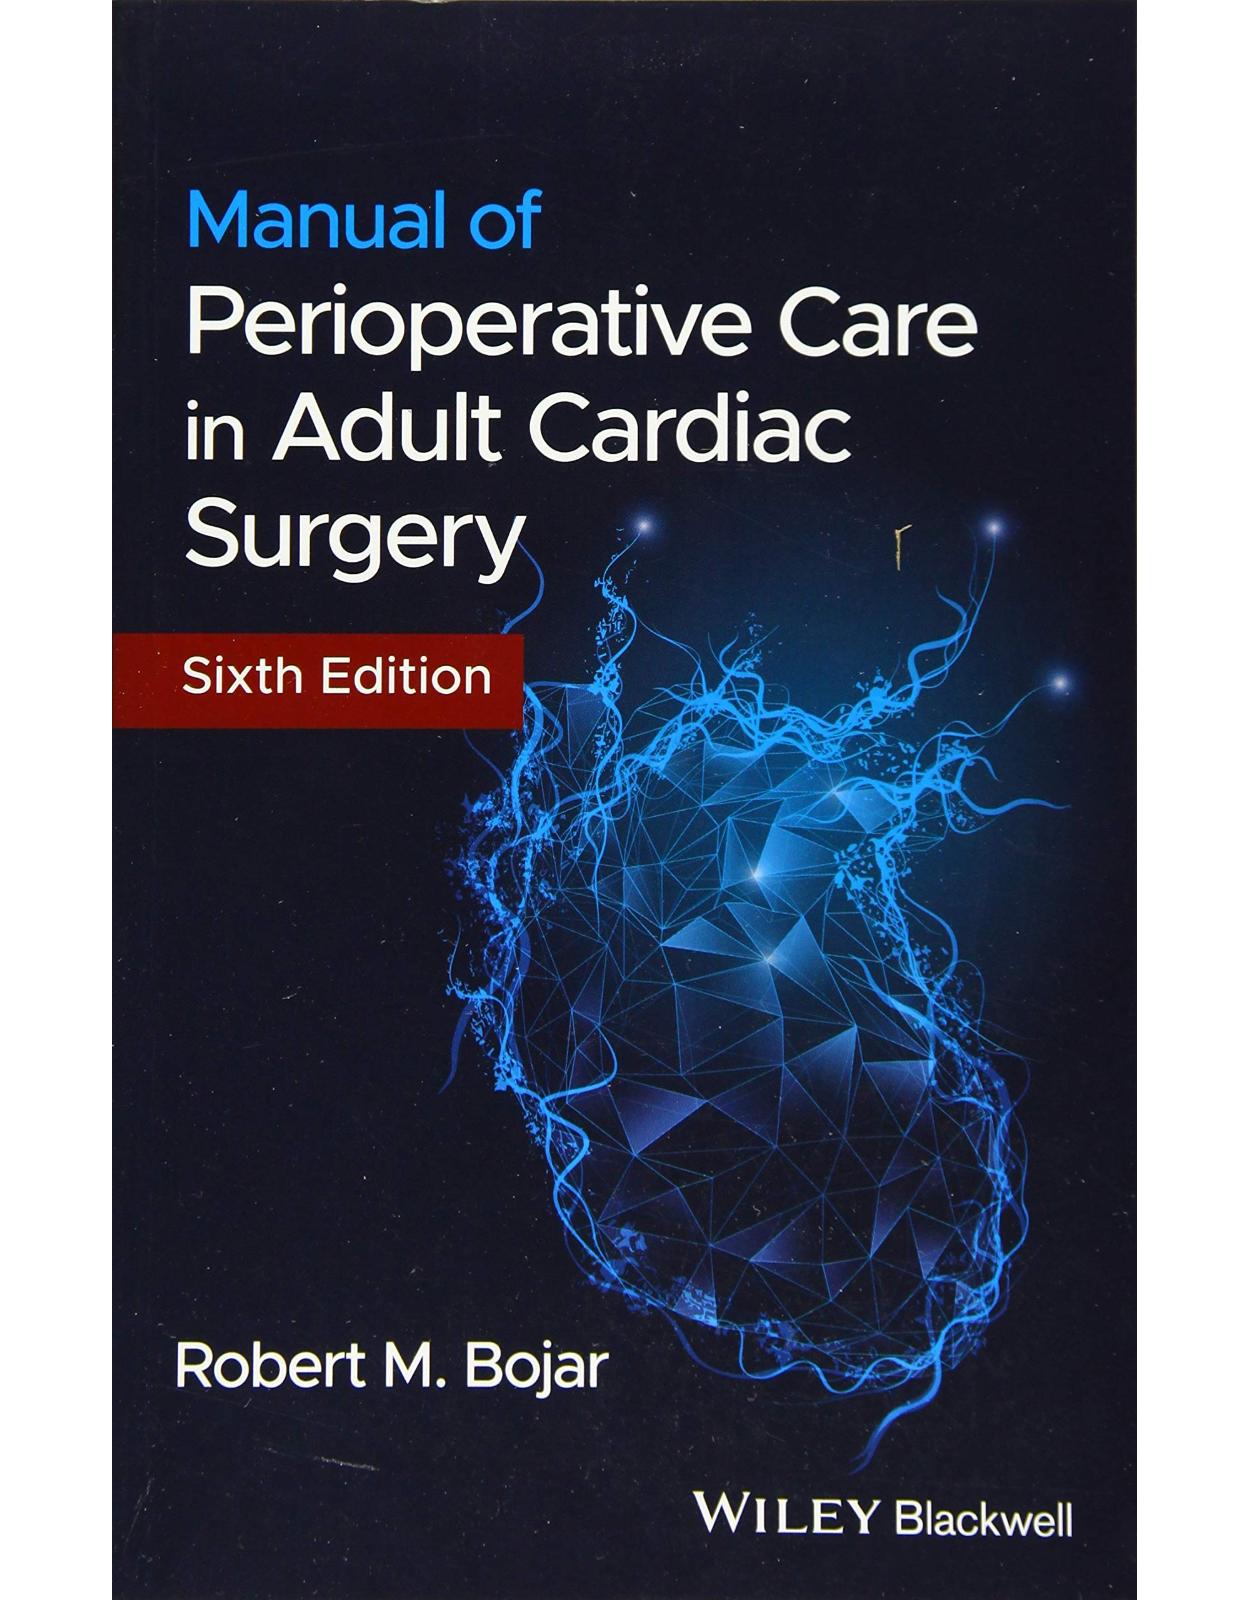 Manual of Perioperative Care in Adult Cardiac Surgery, 6th Edition 